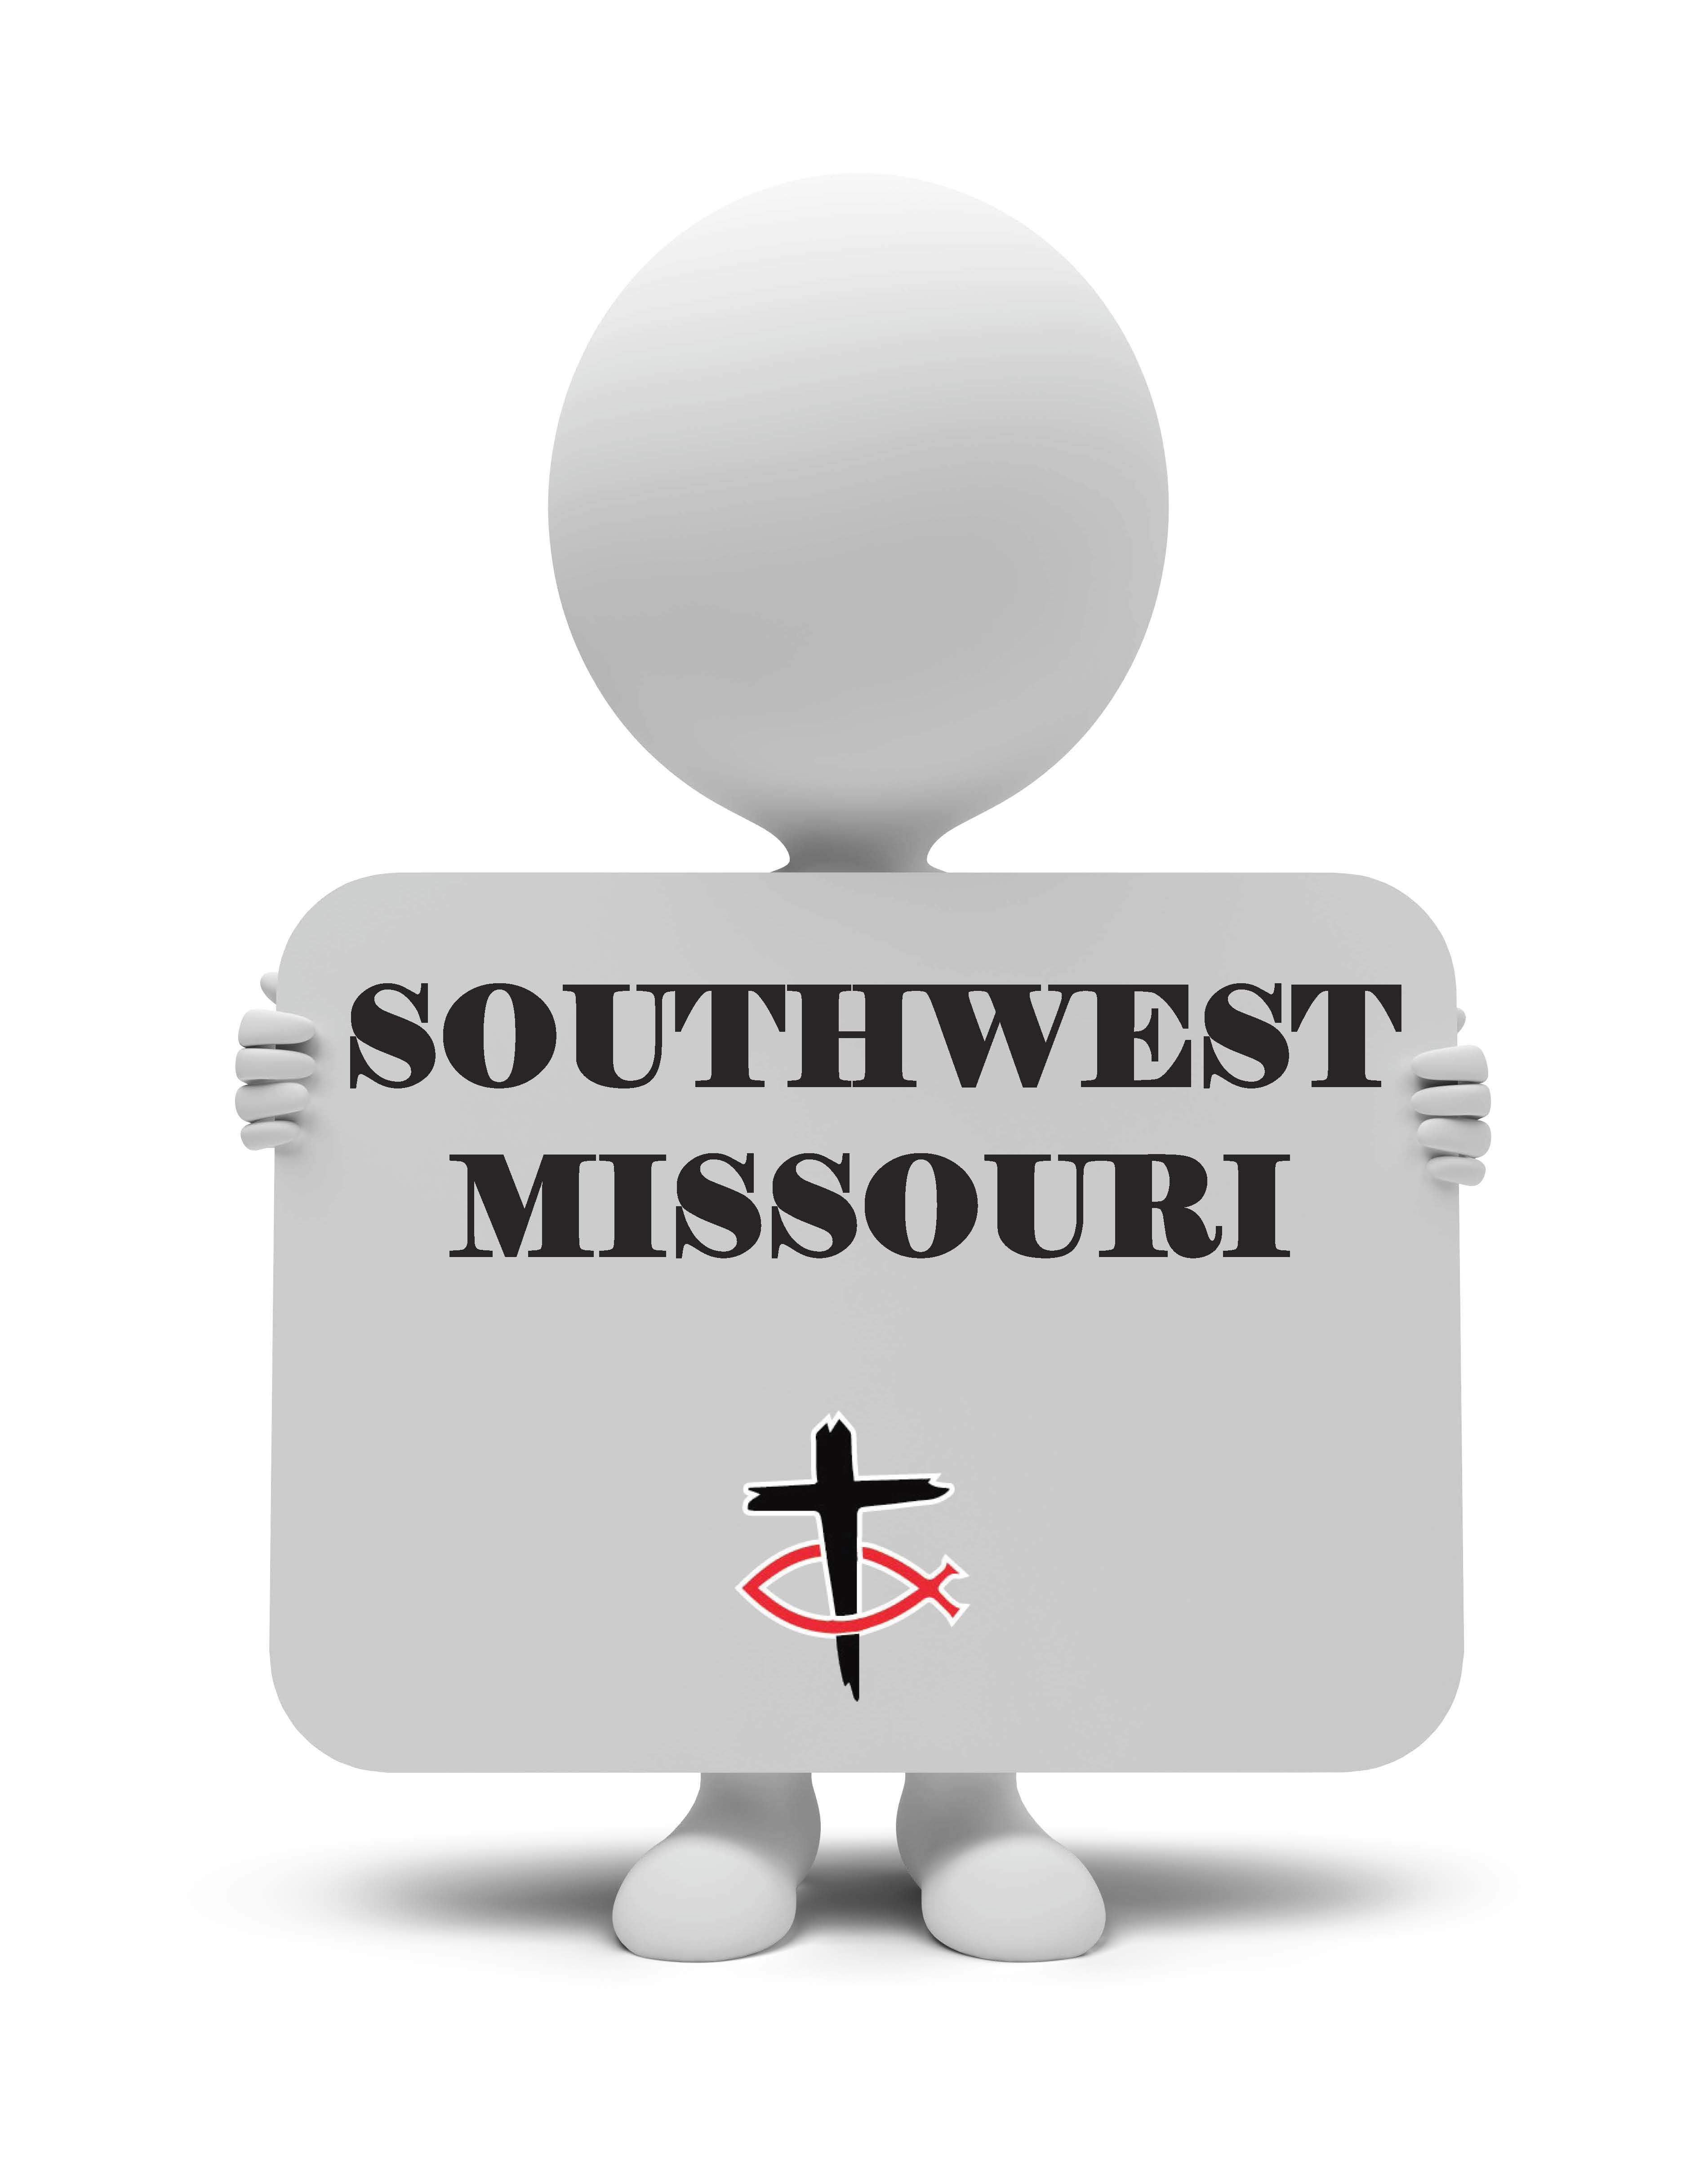 pick up the christian business print guide in southwest missouri